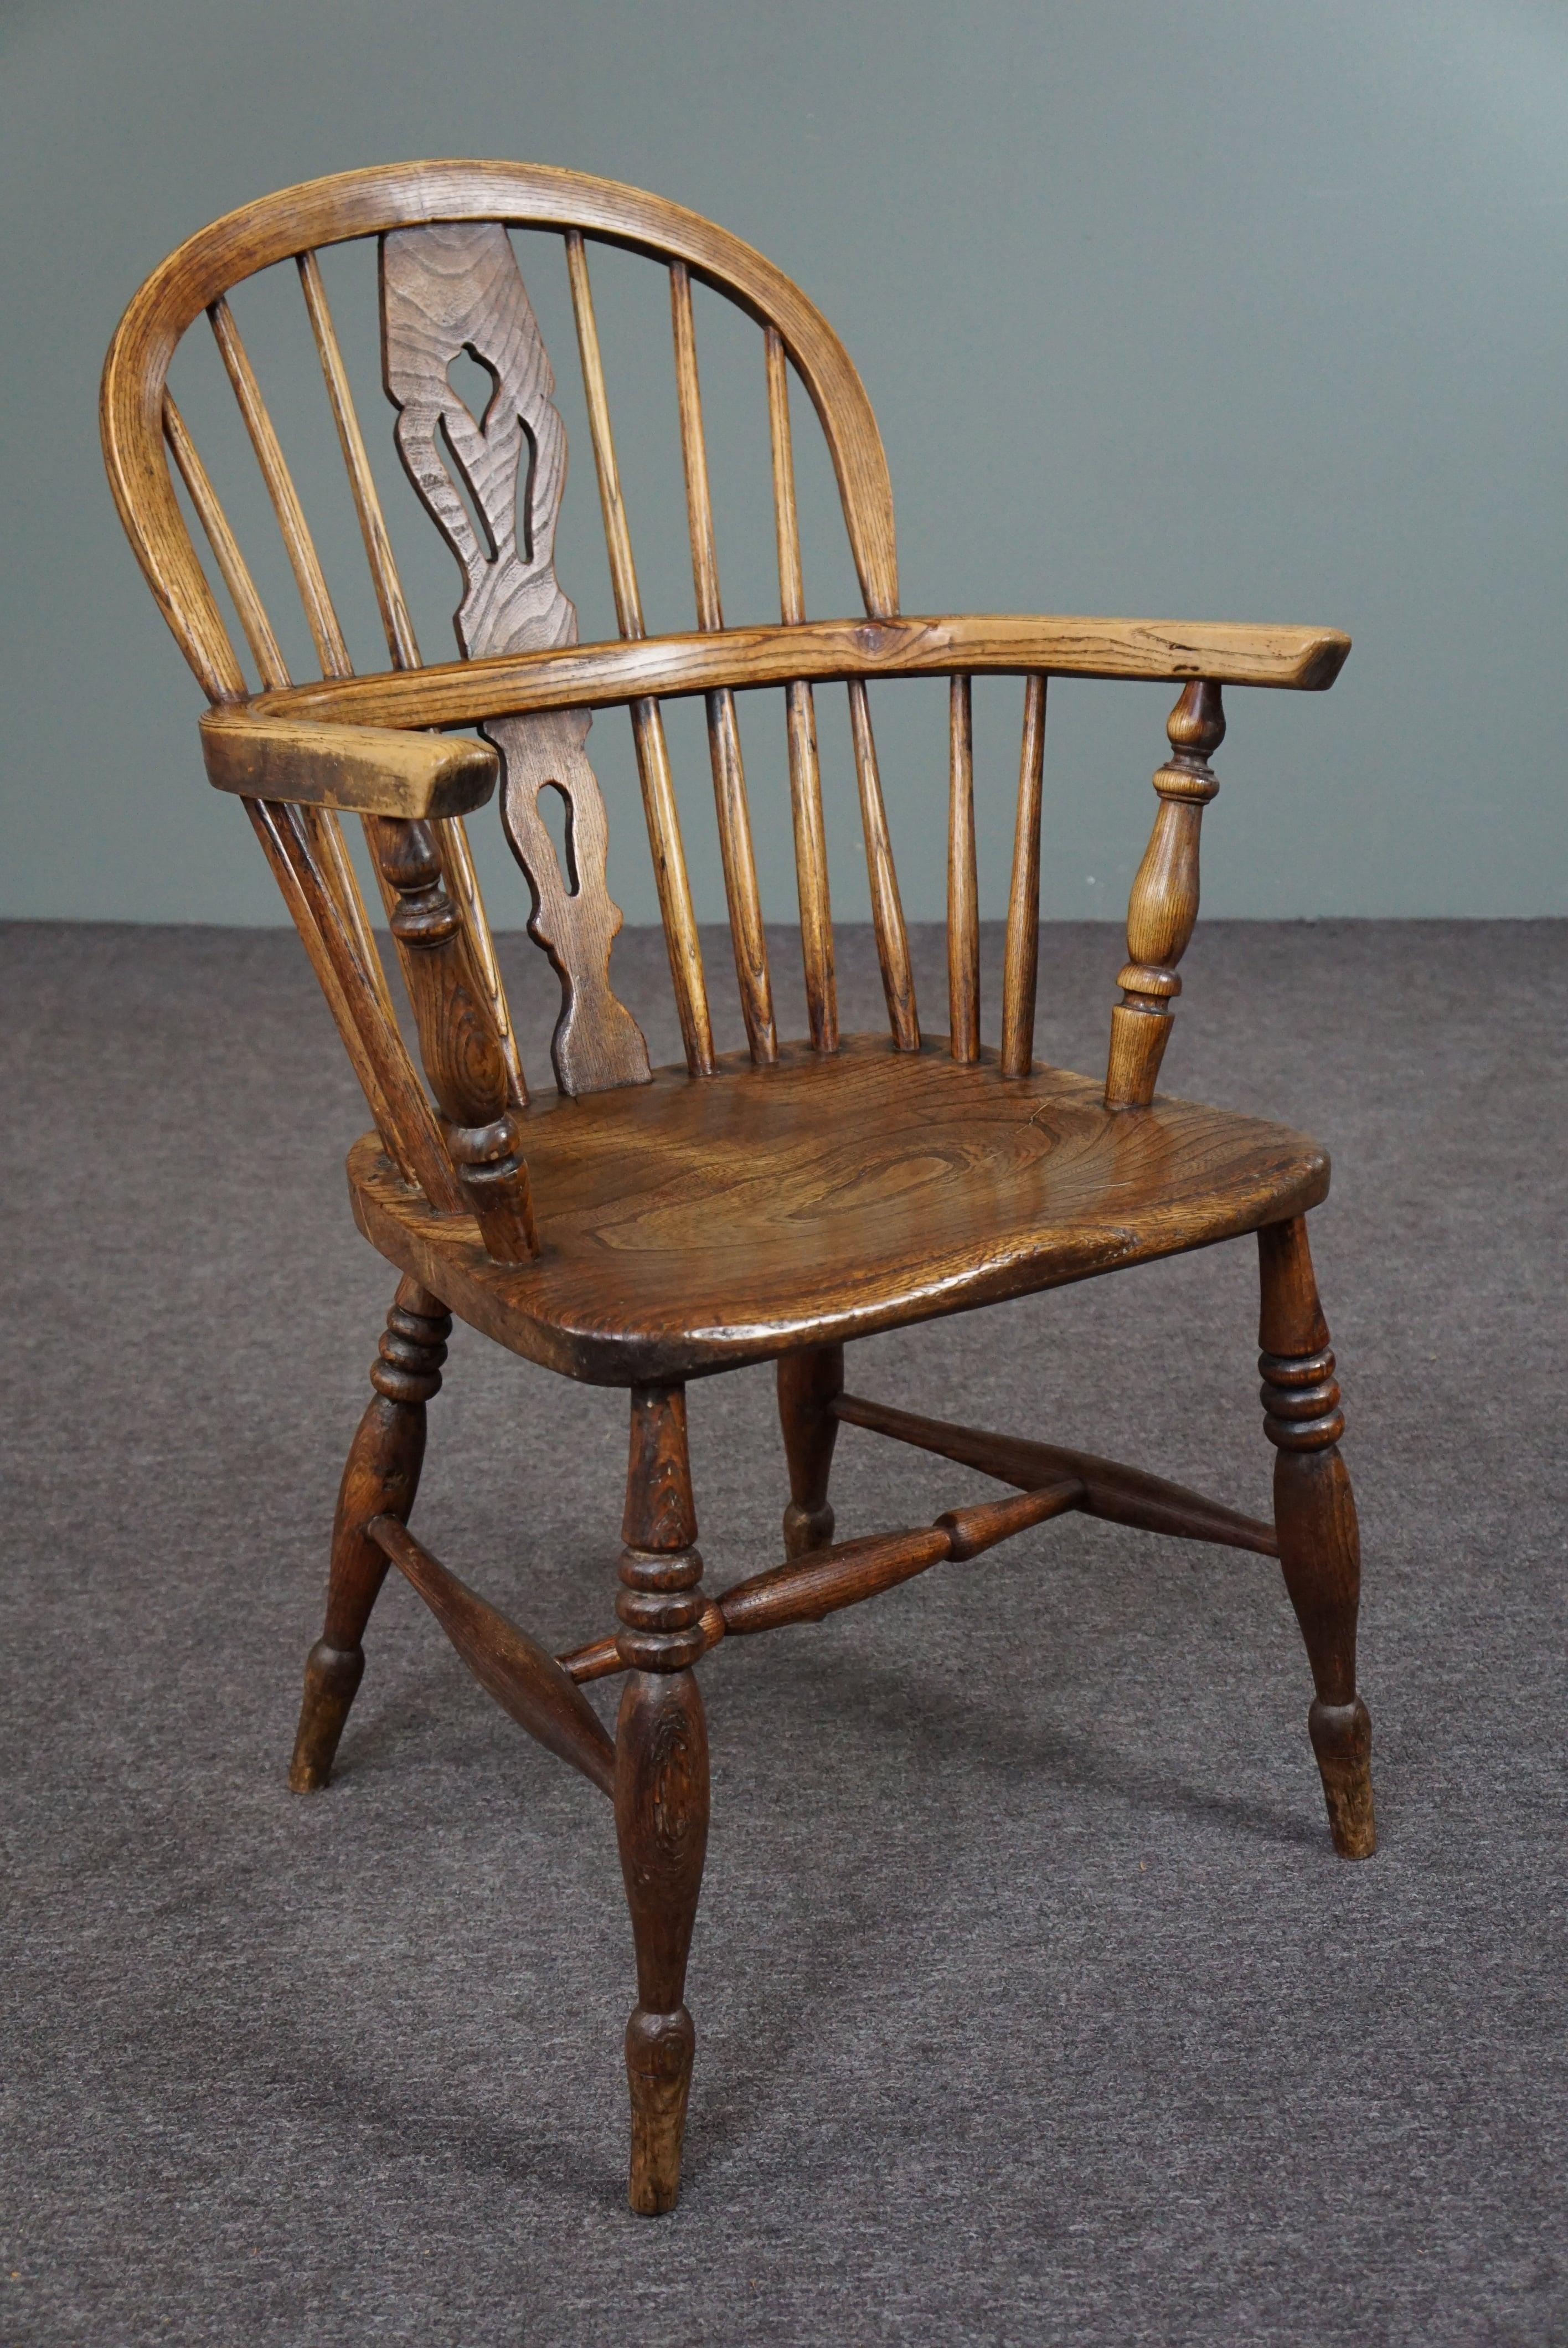 Offered is this beautiful antique armchair made of solid wood with a very beautiful characteristic appearance.

This striking English antique Windsor armchair with armrests has a well-shaped thick solid wooden seat. The chair has charming turned